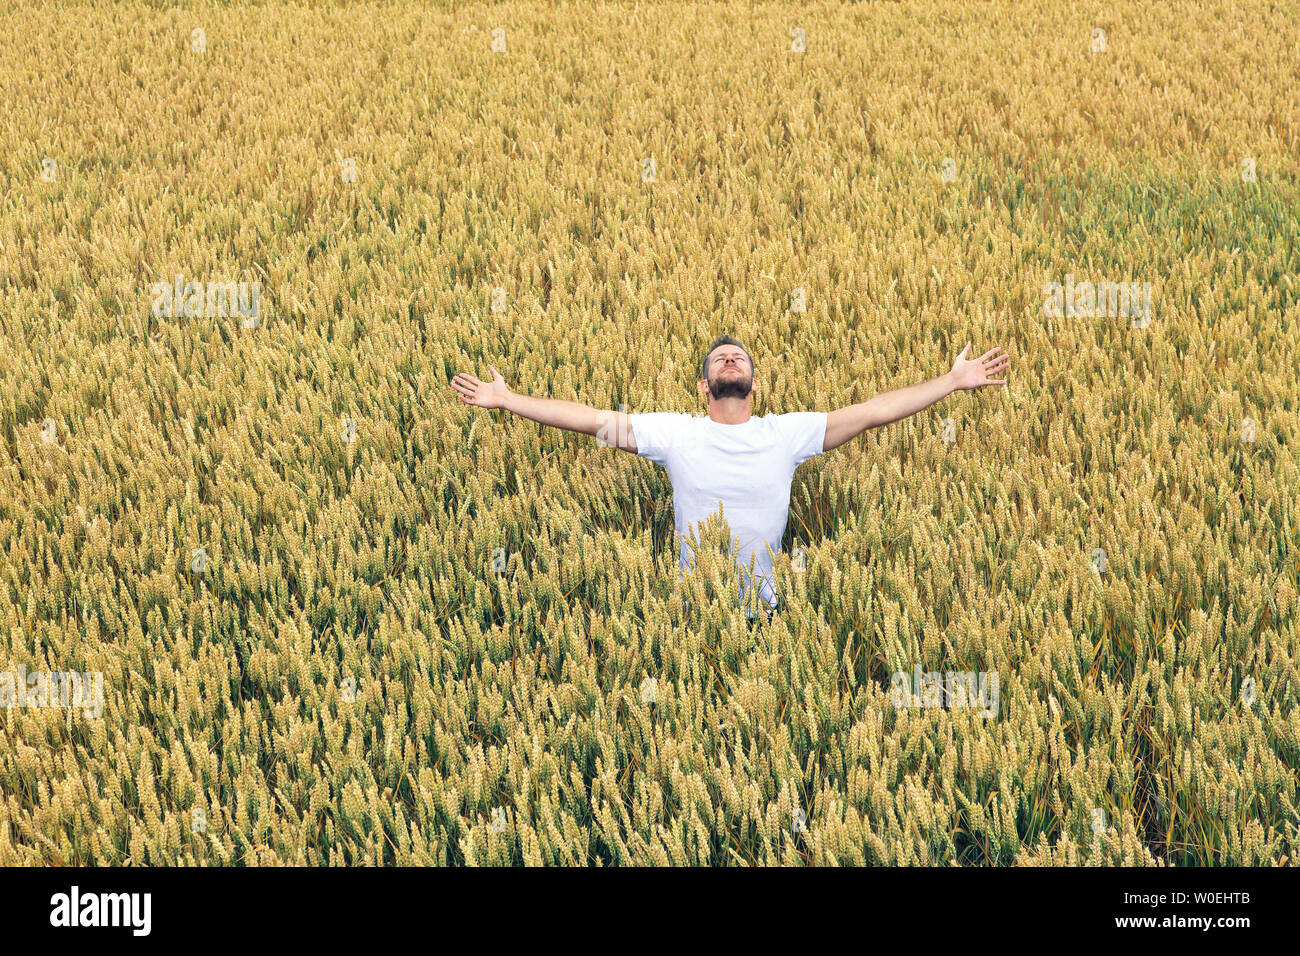 Young man in a wheat field Stock Photo